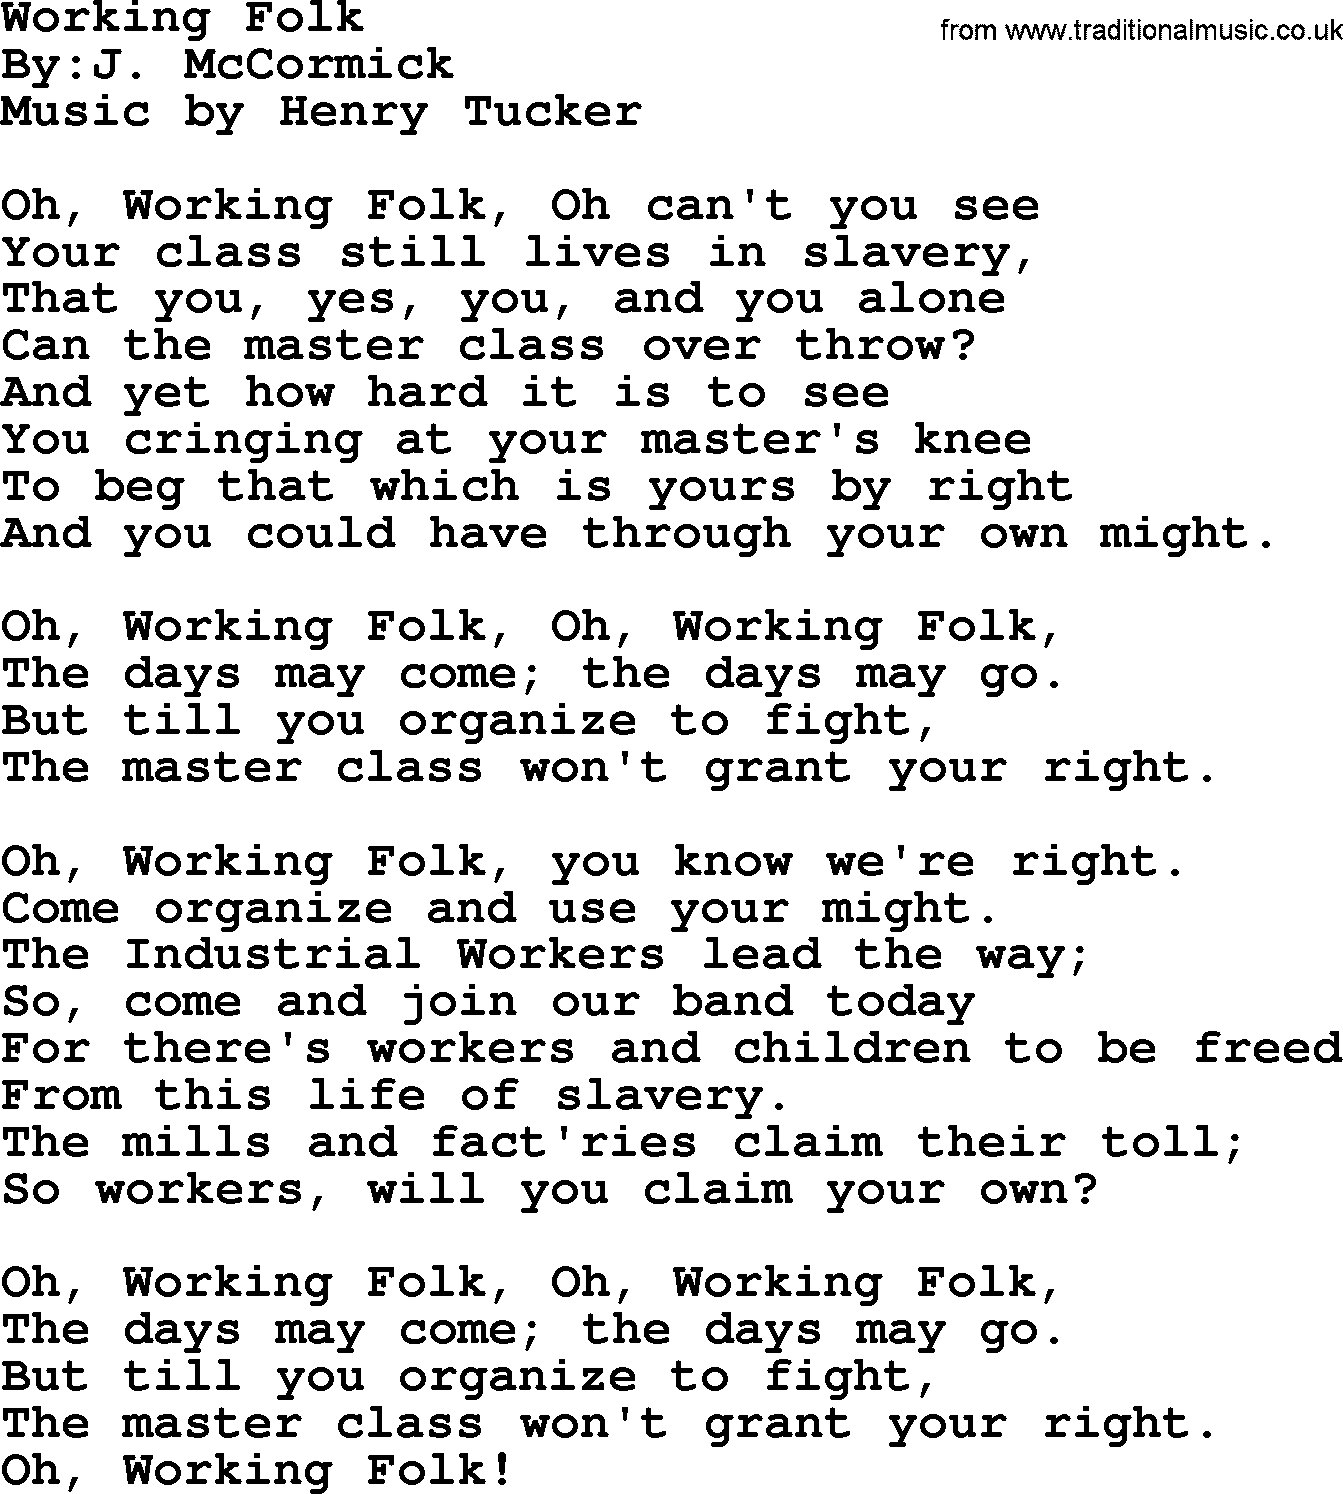 Political, Solidarity, Workers or Union song: Working Folk, lyrics